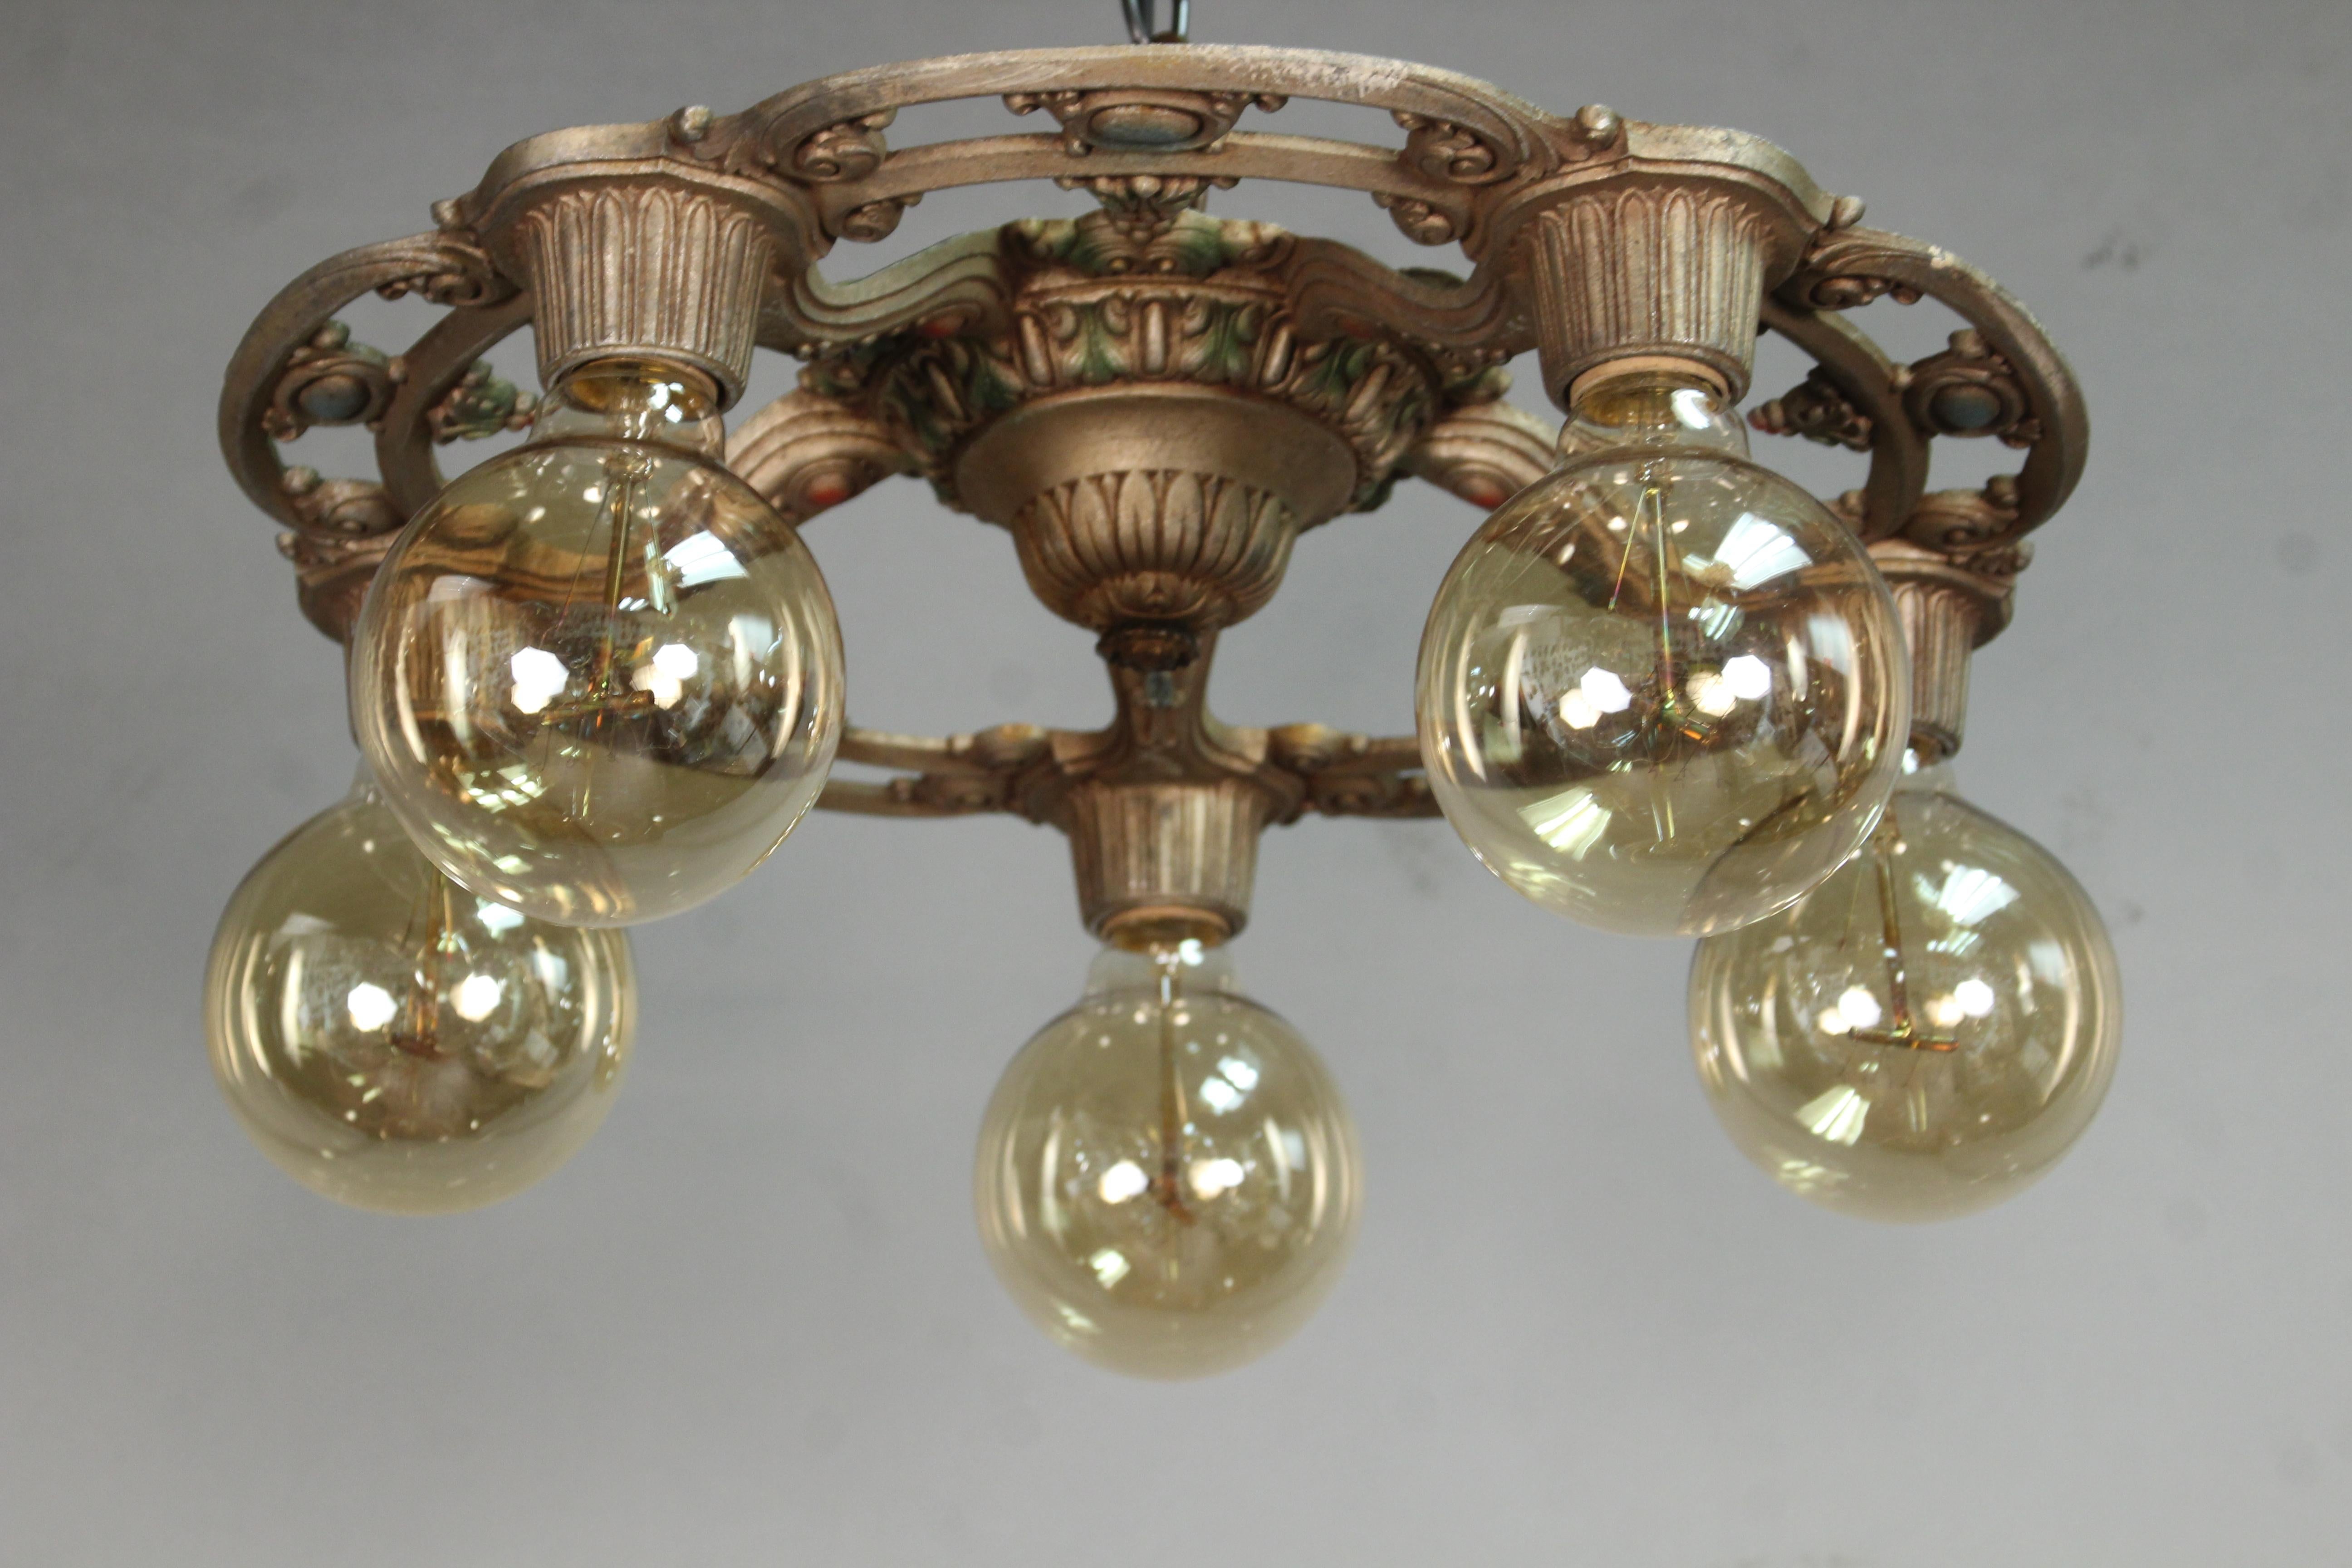 Polychrome details in red and green on metal, down light ceiling mount, circa 1920s.